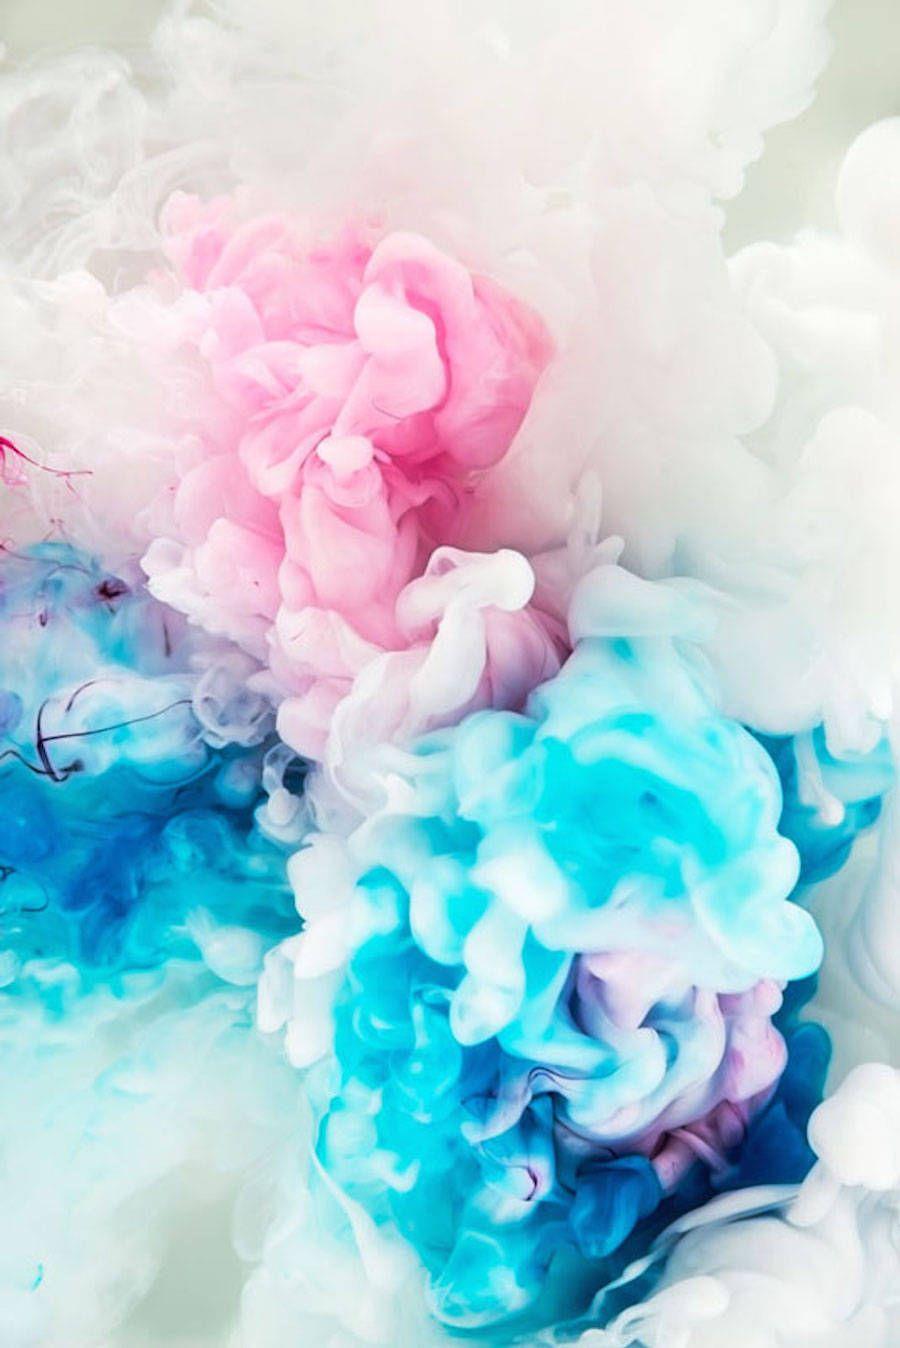 Aesthetic Colored Abstract Ink Explosions. Wallpaper, Phone and iPad